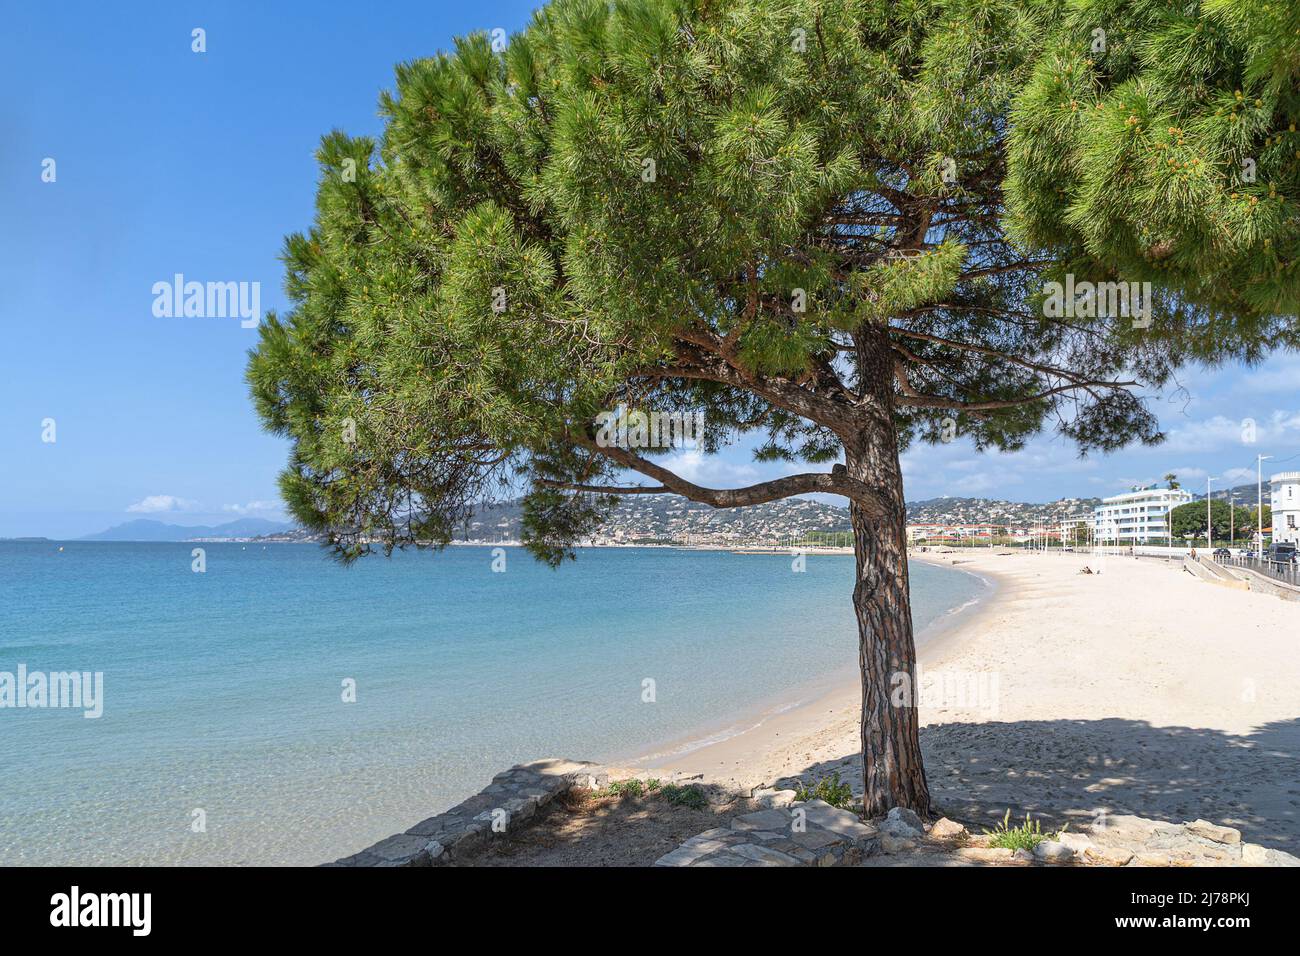 The beach at juan Les Pins on the Cote d'Azur Stock Photo